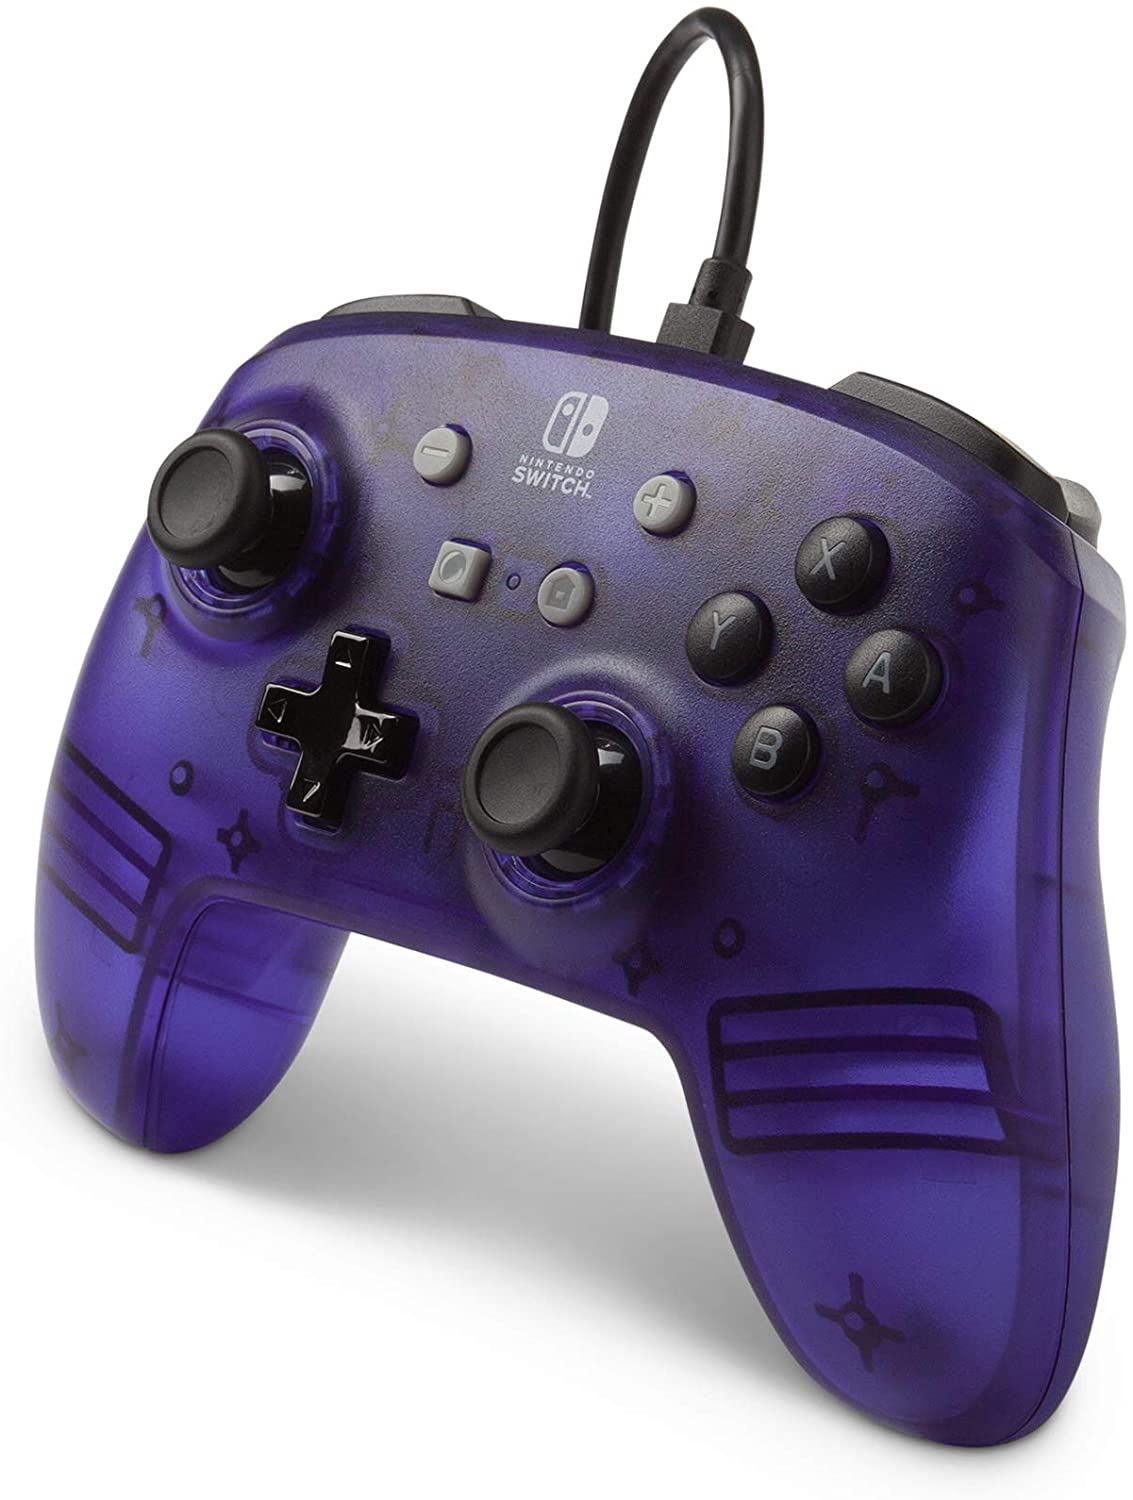 PowerA Wired Controller For Nintendo Switch - Purple Frost - Level UpPowerASwitch Accessories617885021282